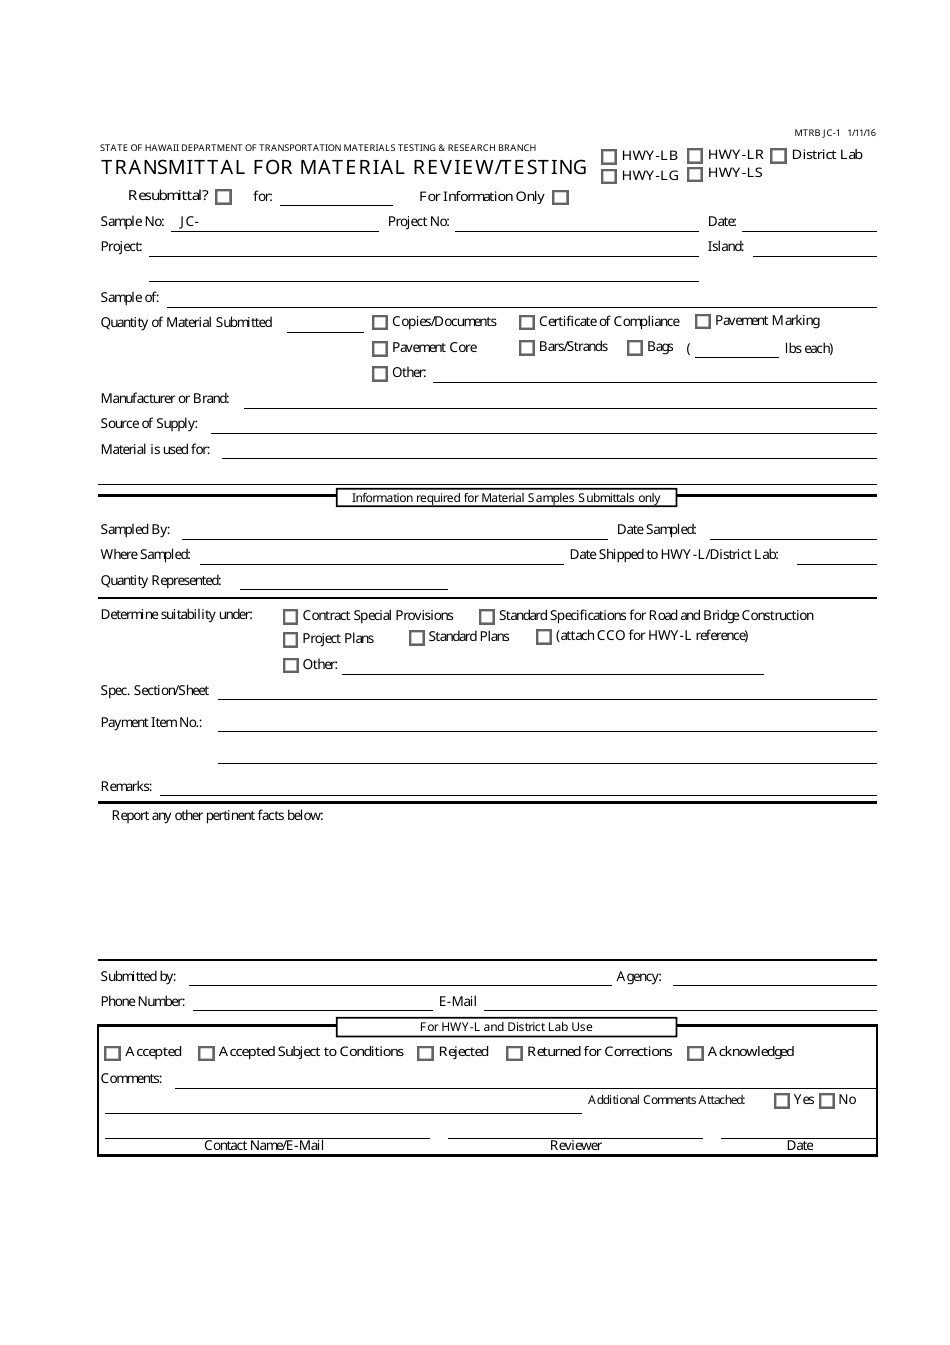 Form MTRB JC-1 Transmittal for Material Review / Testing - Hawaii, Page 1